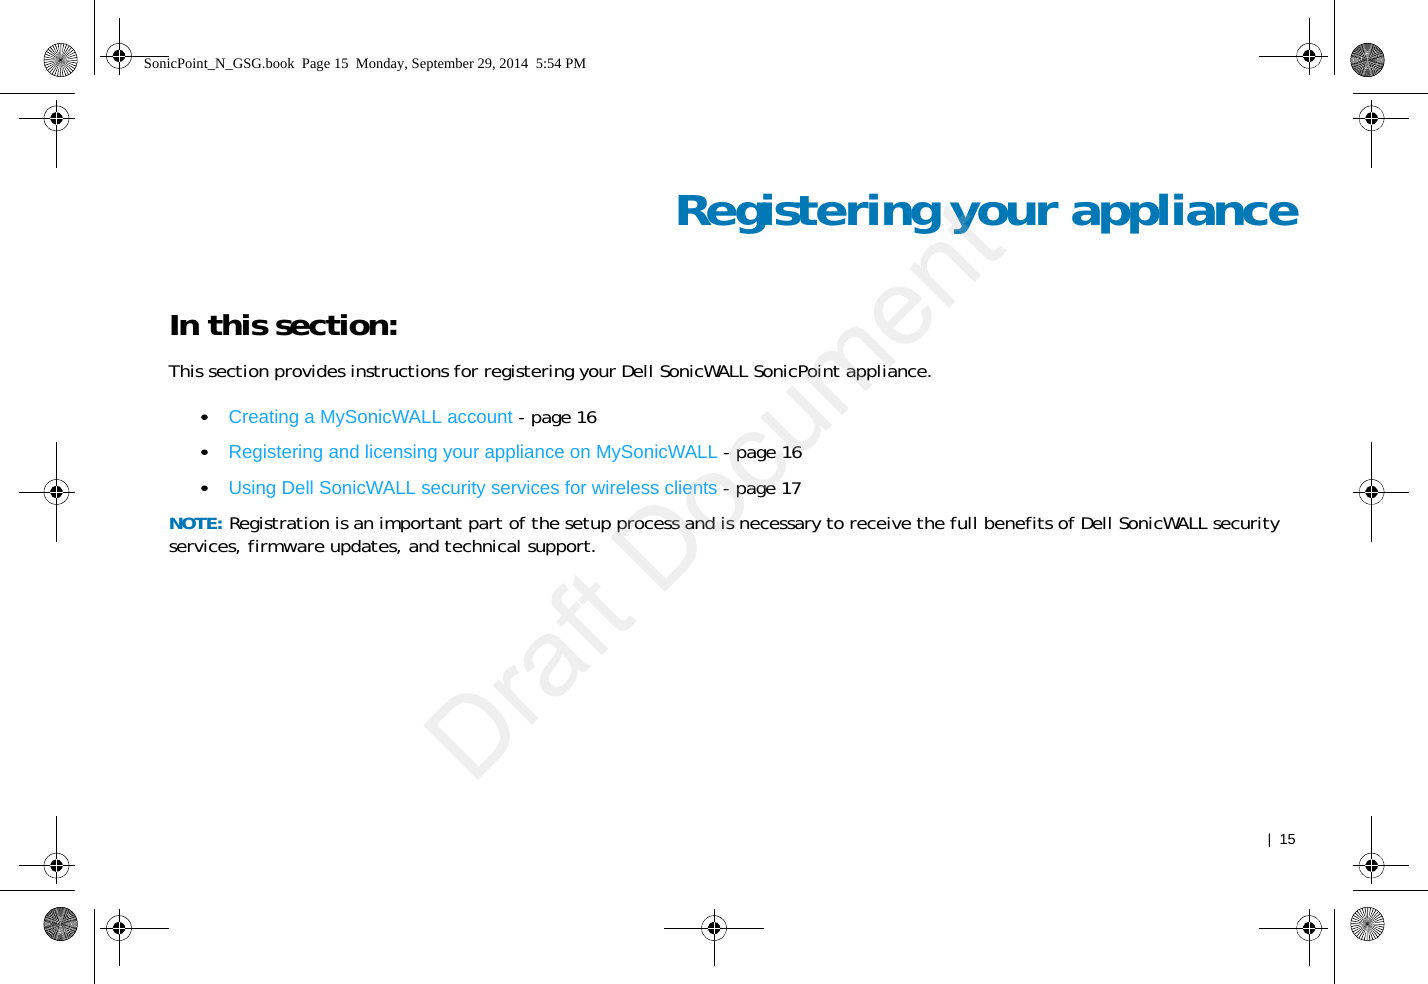   |  15Registering your applianceIn this section:This section provides instructions for registering your Dell SonicWALL SonicPoint appliance.•Creating a MySonicWALL account - page 16•Registering and licensing your appliance on MySonicWALL - page 16•Using Dell SonicWALL security services for wireless clients - page 17NOTE: Registration is an important part of the setup process and is necessary to receive the full benefits of Dell SonicWALL security services, firmware updates, and technical support.SonicPoint_N_GSG.book  Page 15  Monday, September 29, 2014  5:54 PMDraft Document